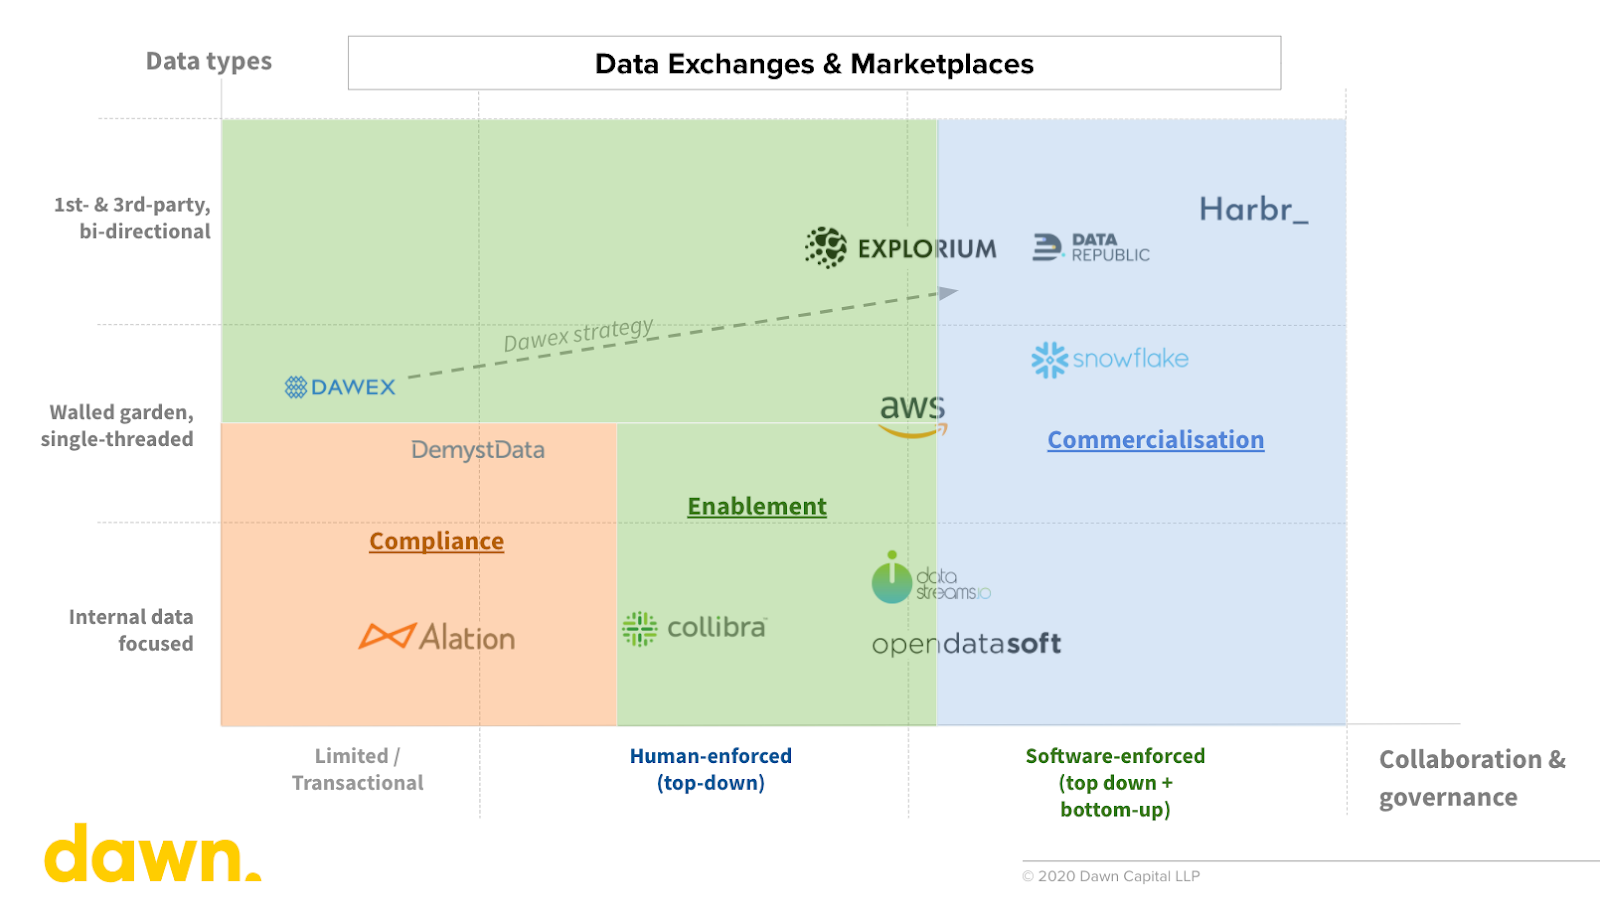 Where Harbr sits in the data exhange market